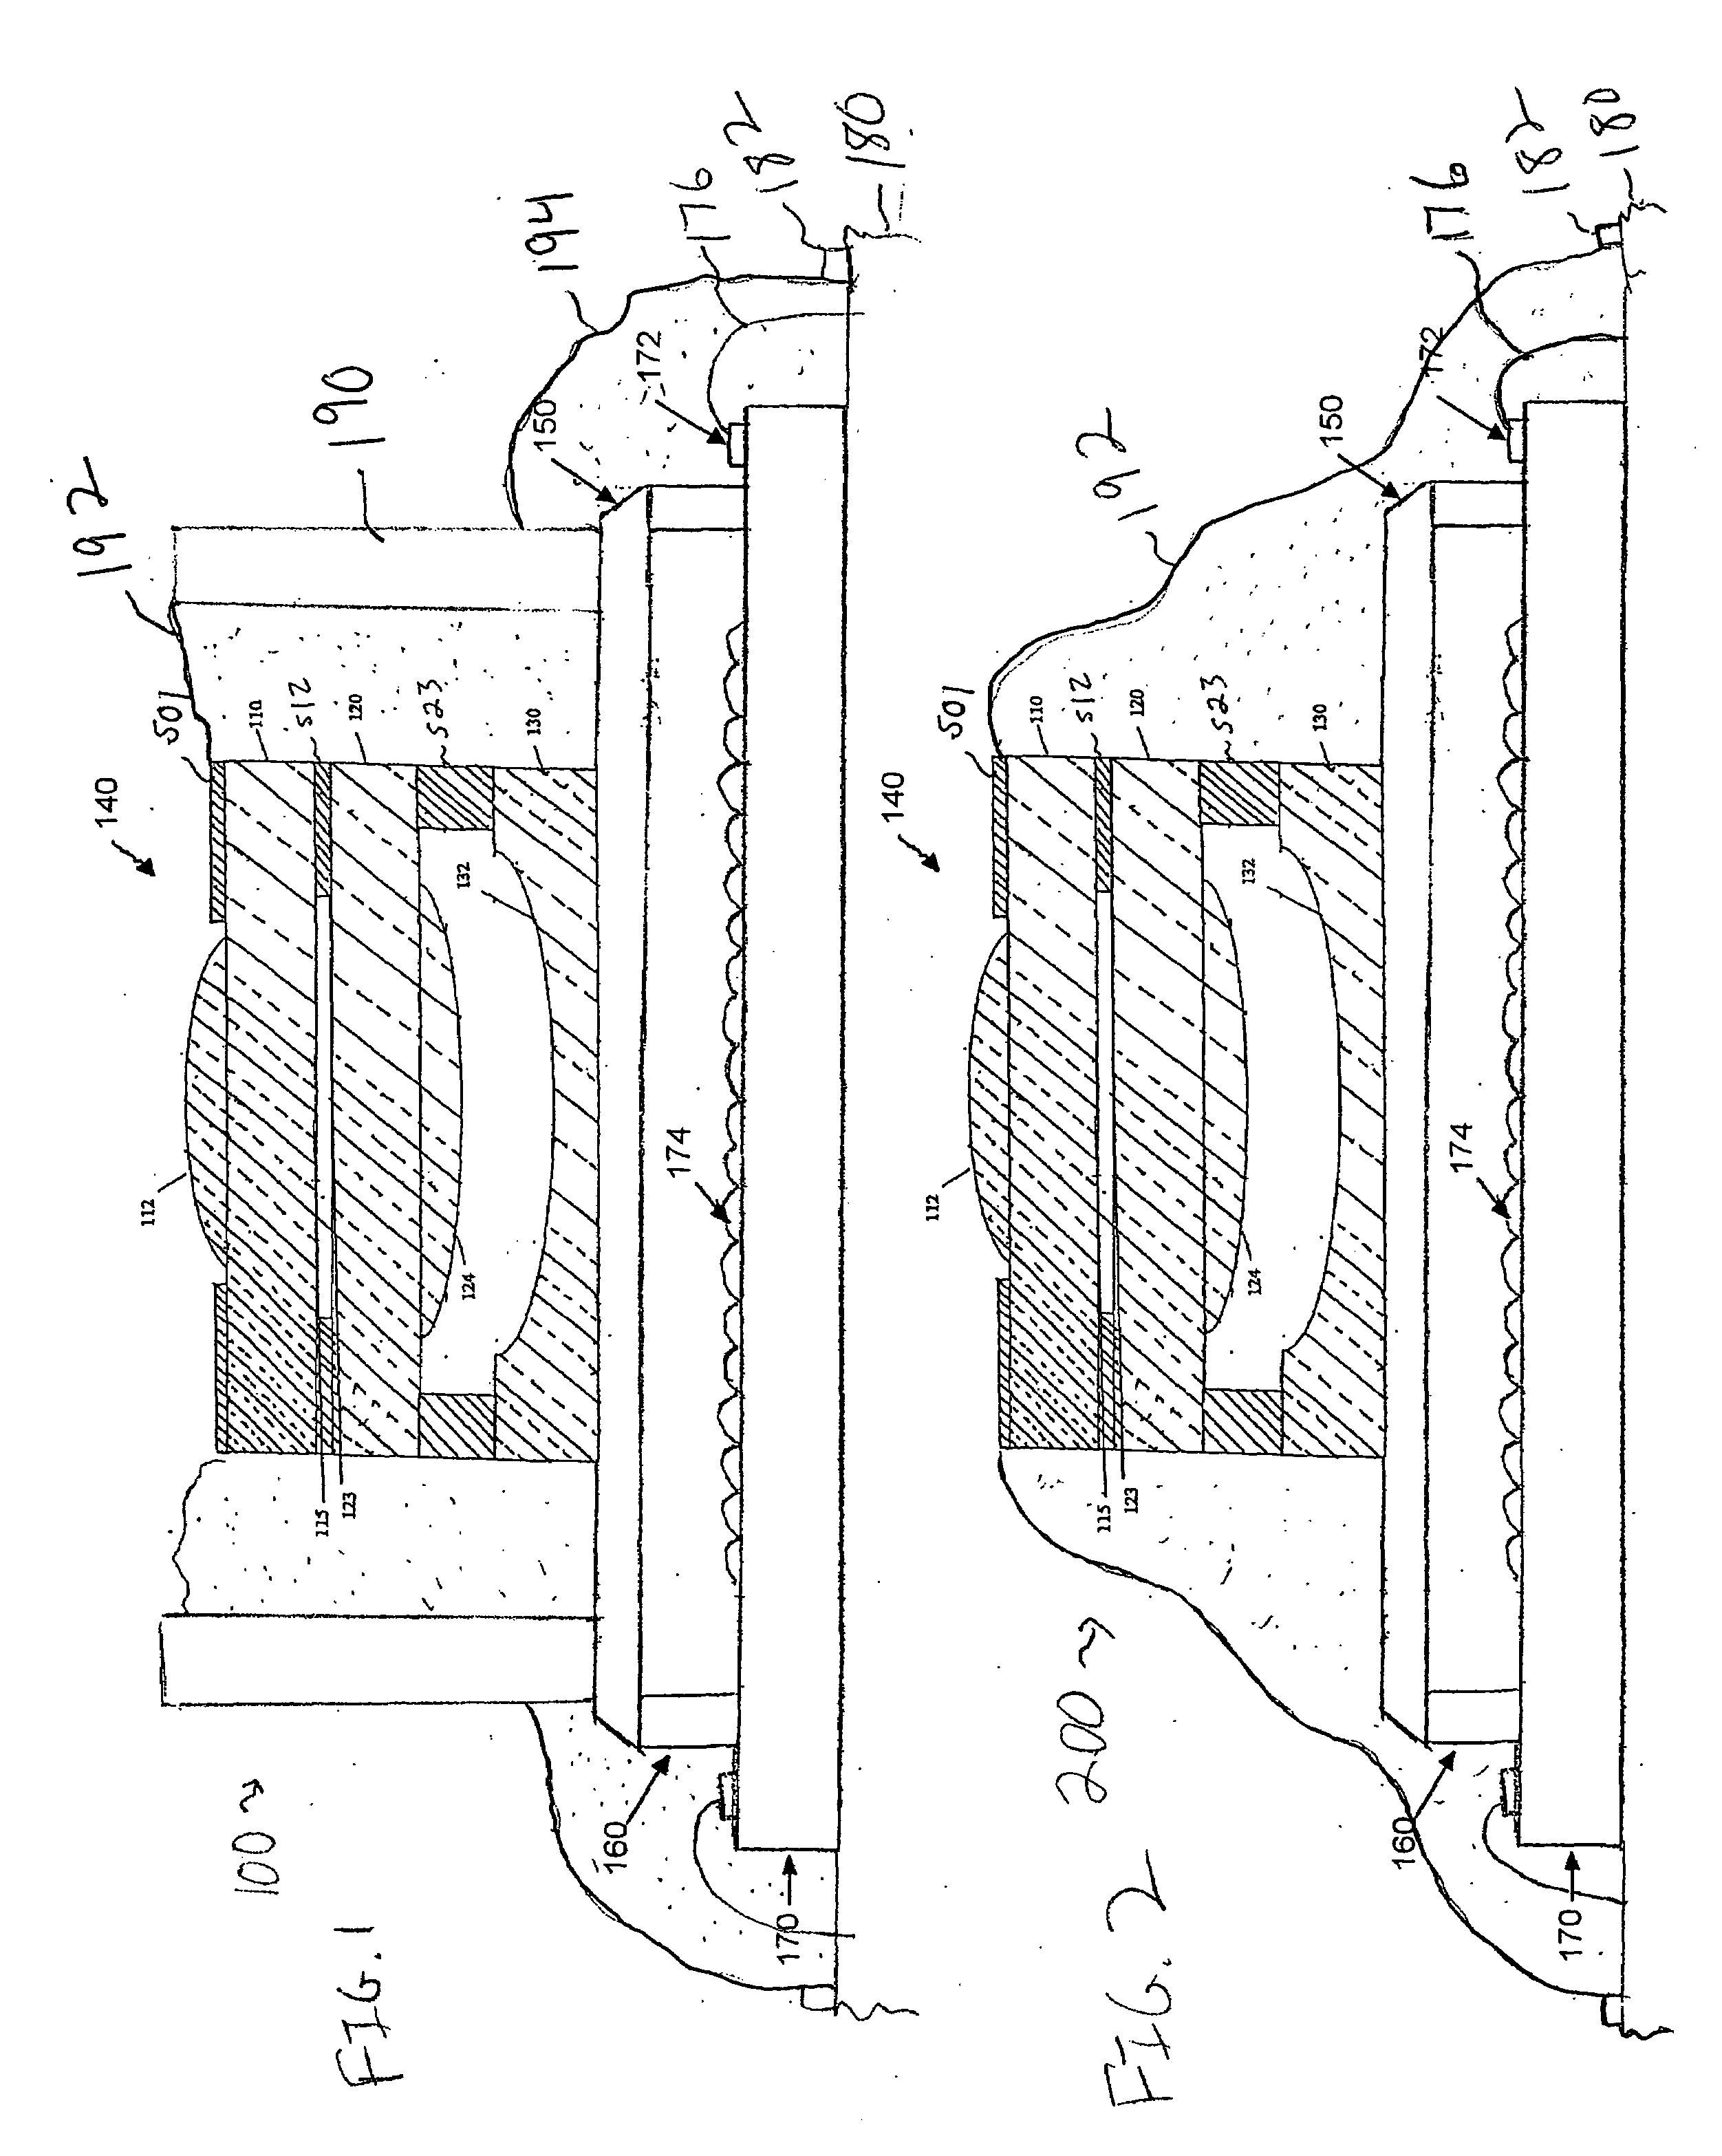 Control of stray light in camera systems employing an optics stack and associated methods